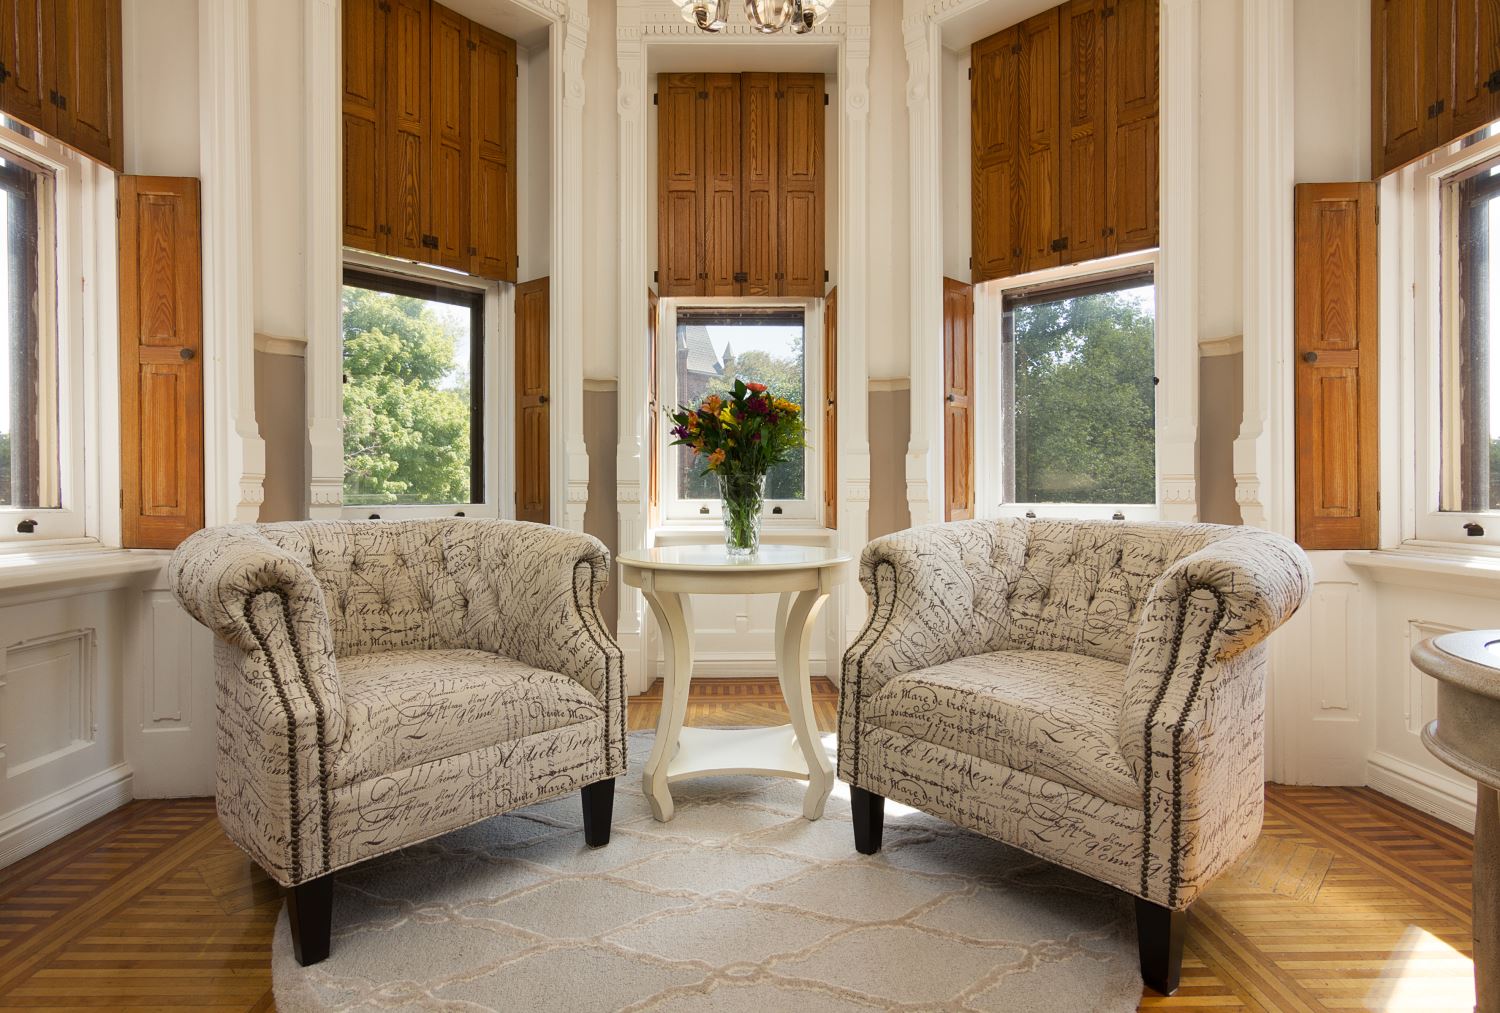 Belle fonte room sitting area with chairs and bay windows